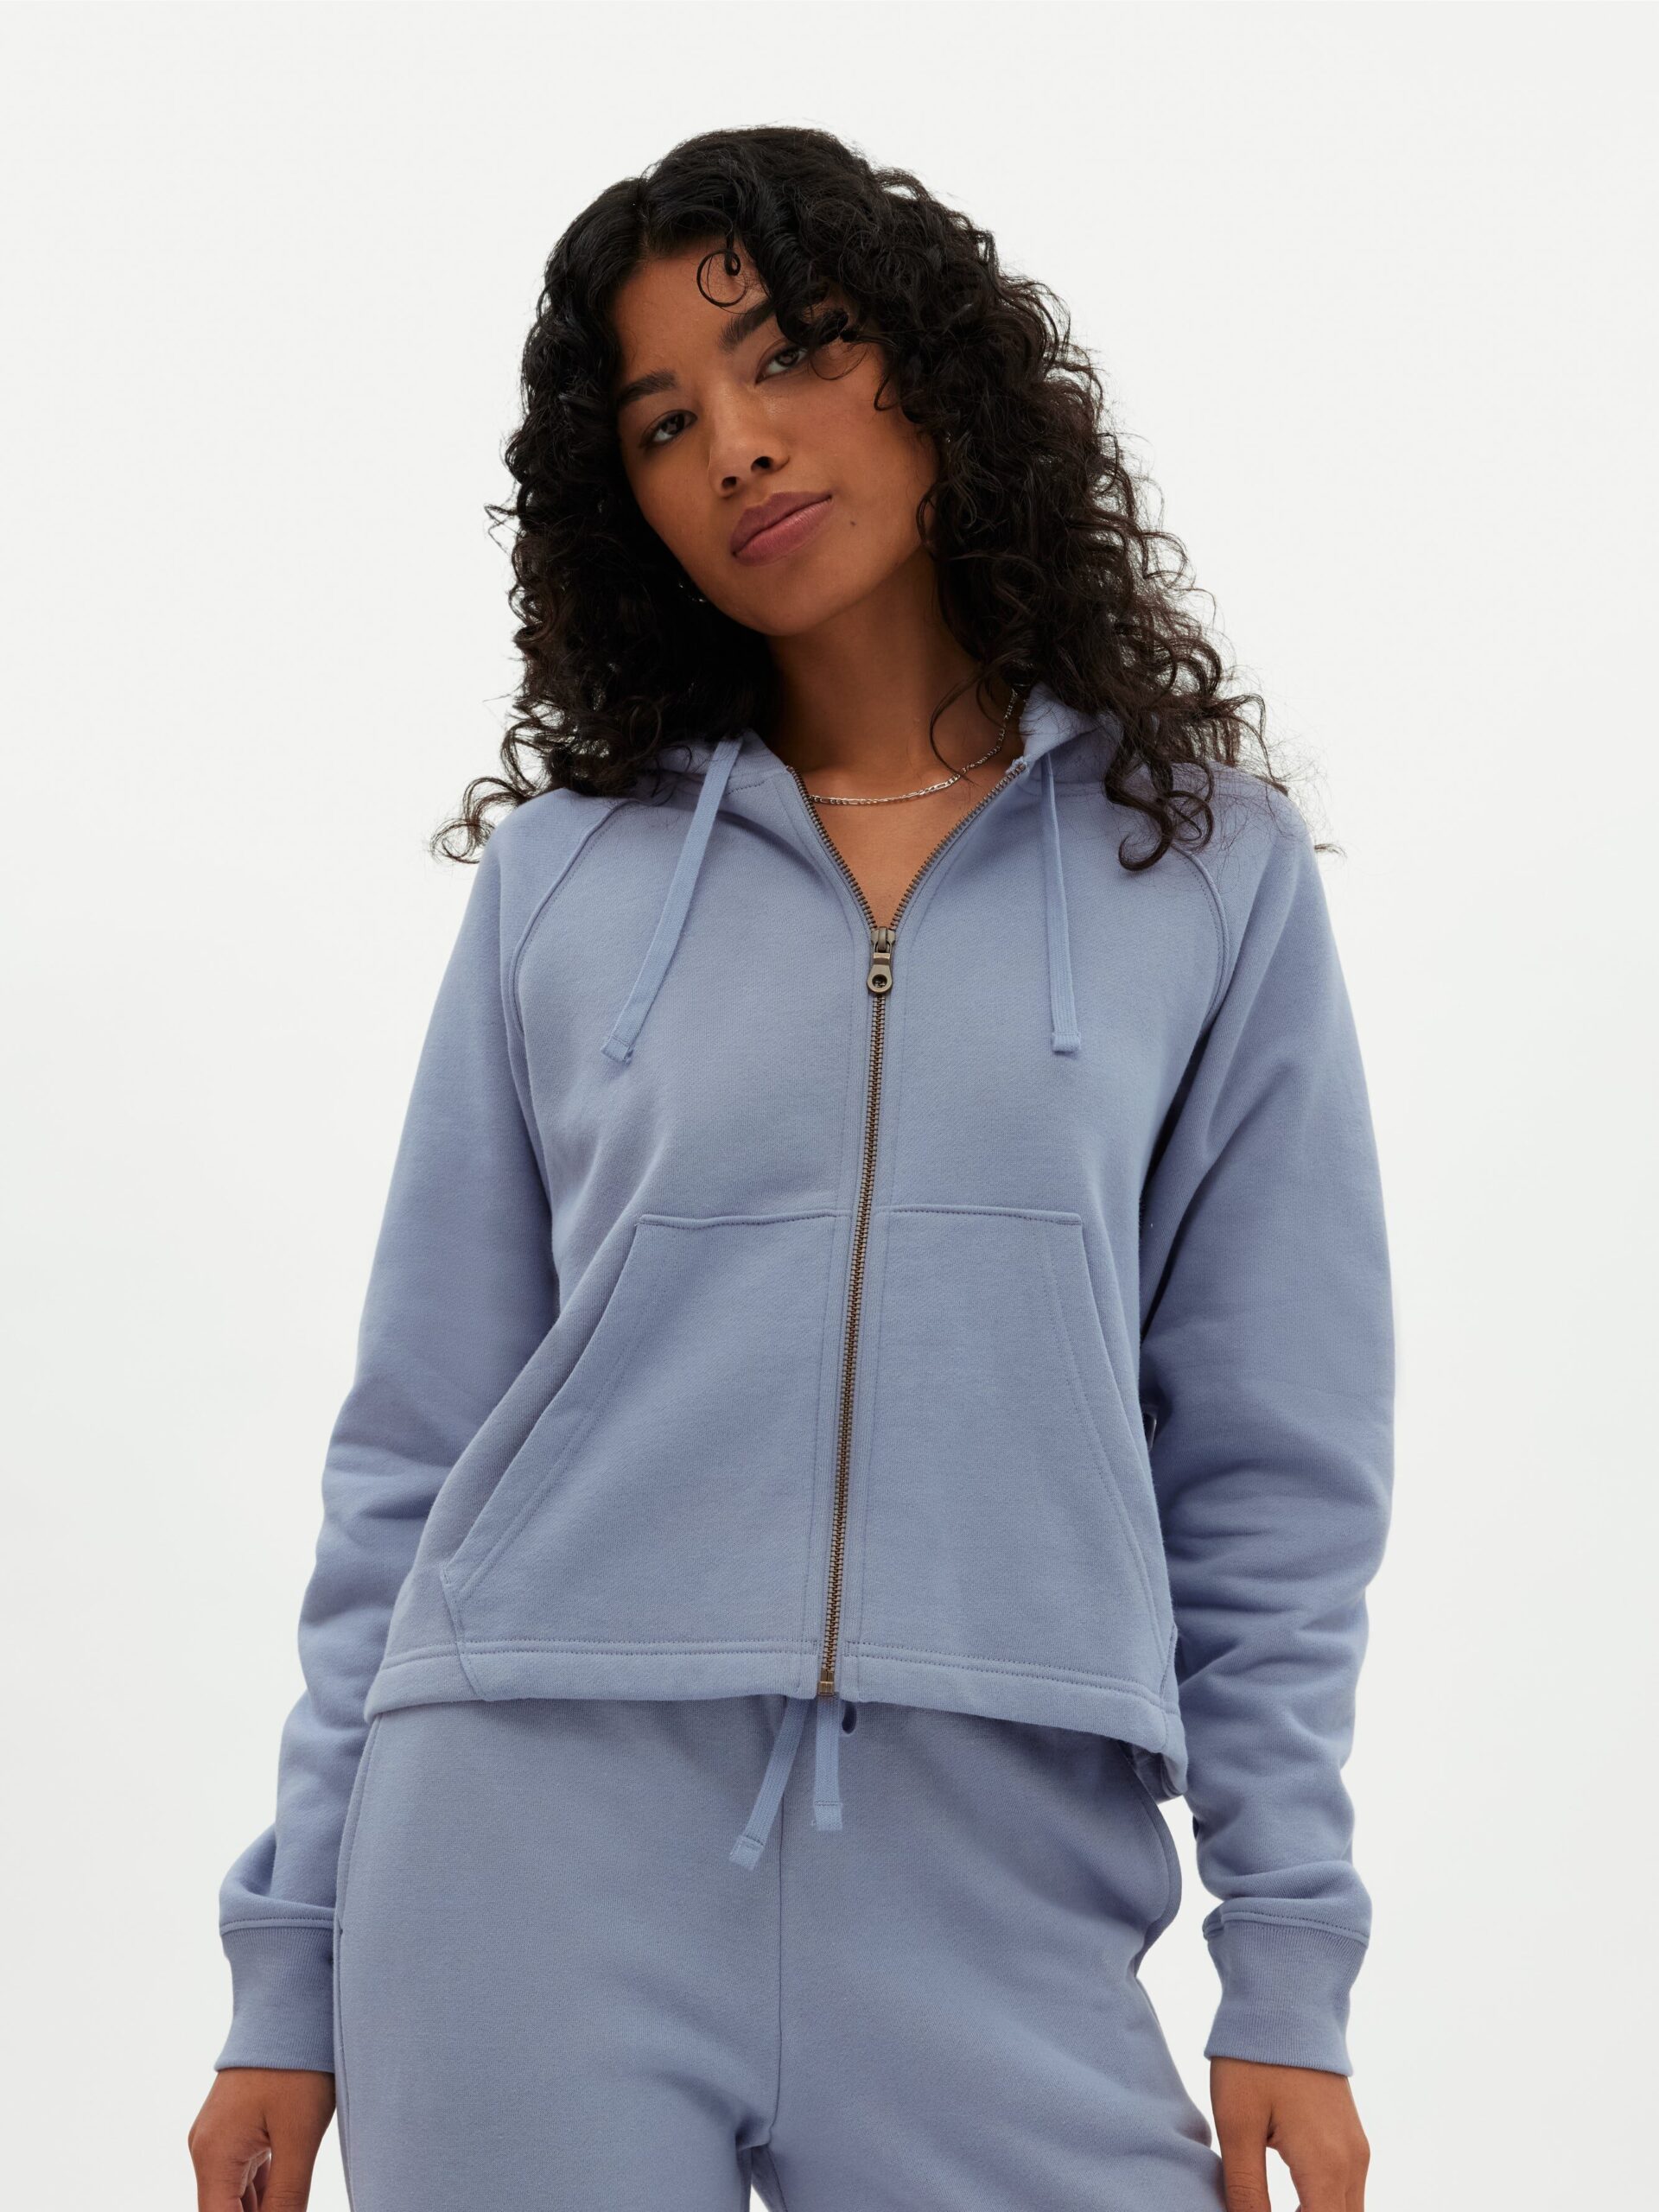 A model wearing a periwinkle blue zip up sweat set by Girlfriend Collective.